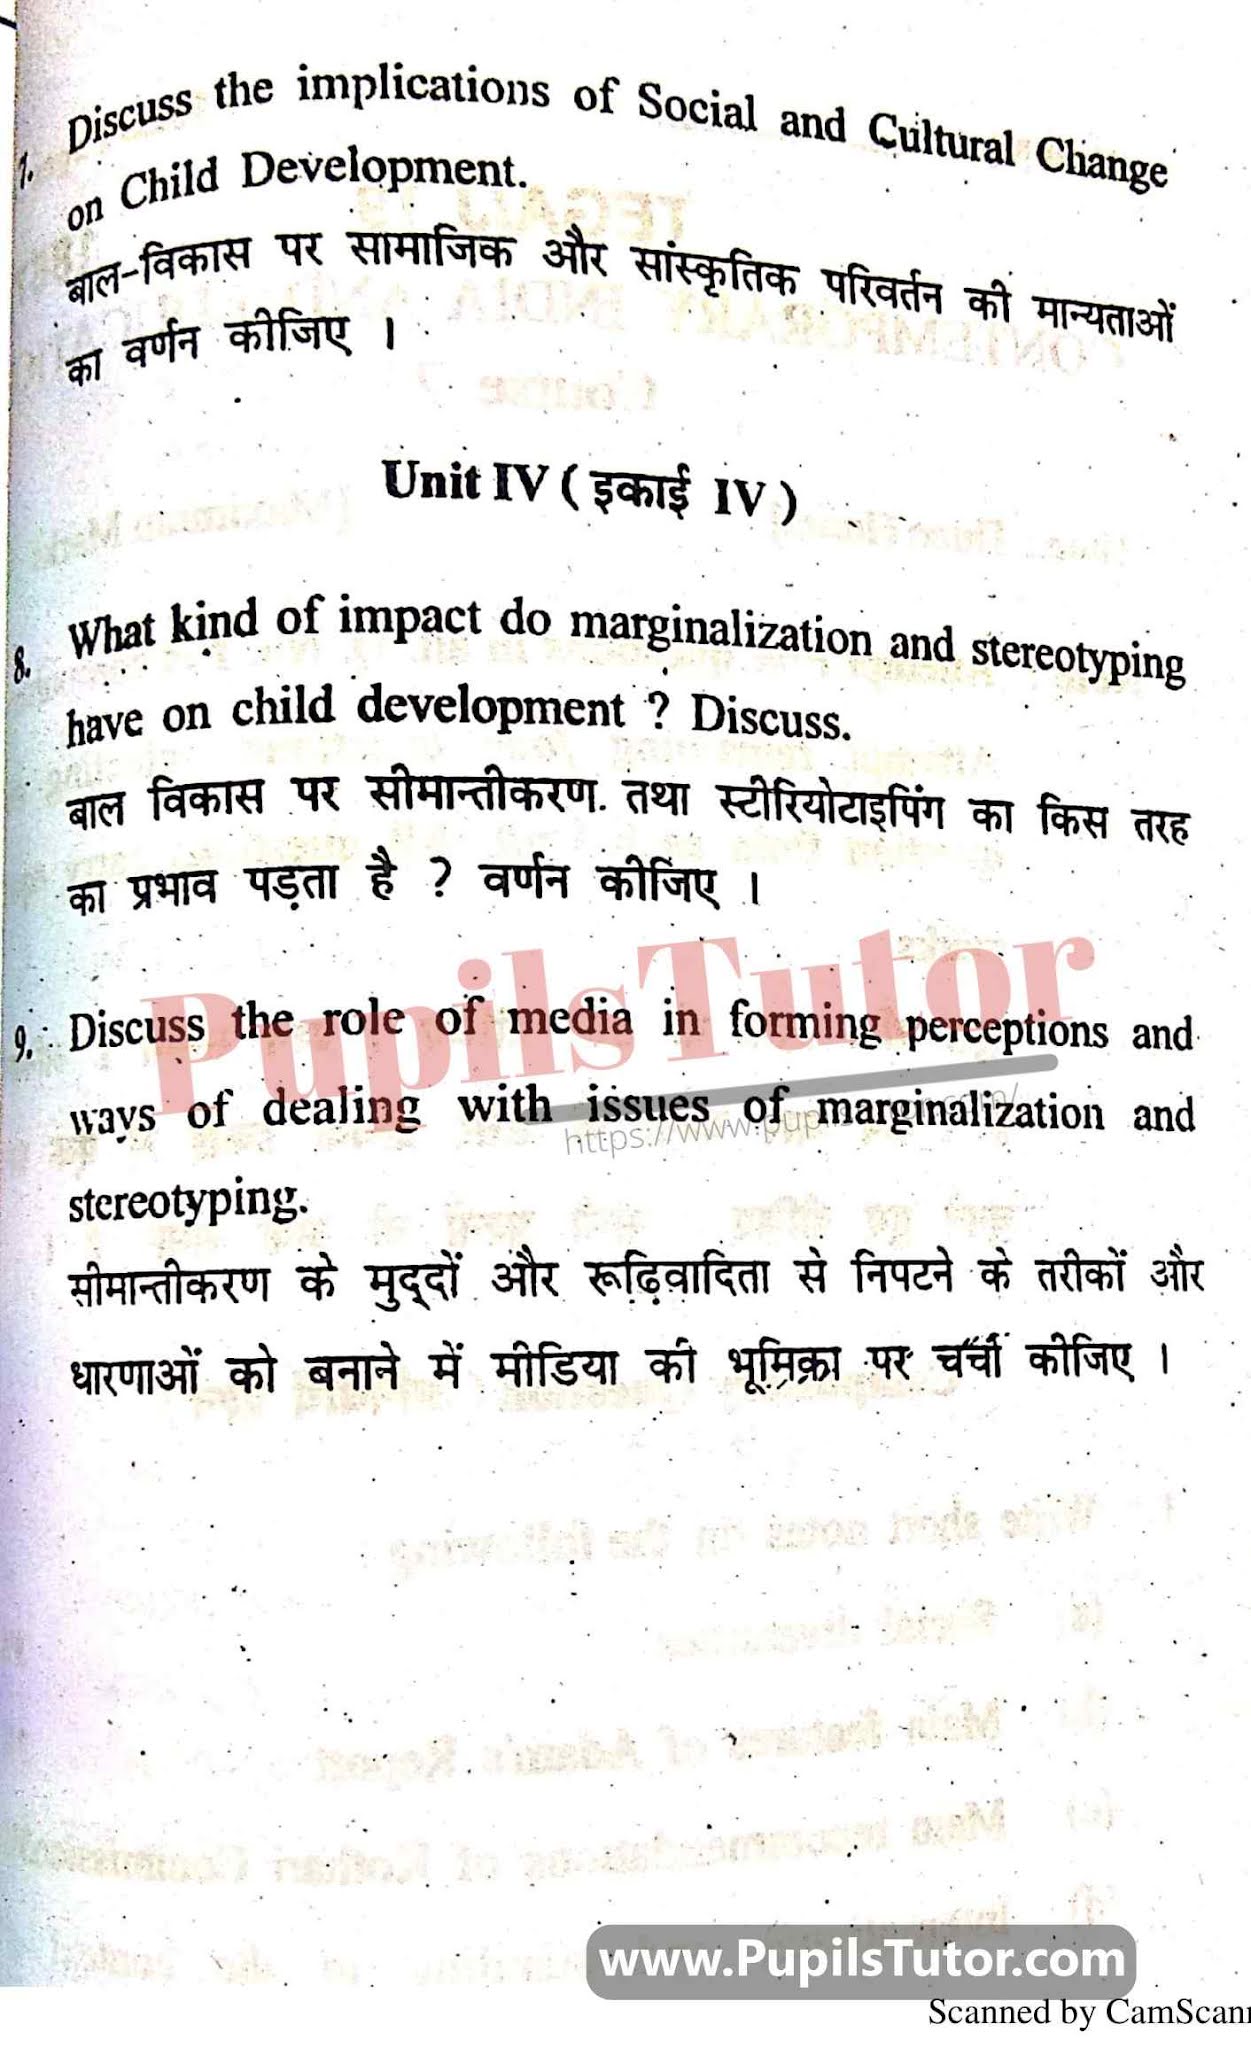 KUK (Kurukshetra University, Haryana) Childhood And Growing Up Question Paper 2019 For B.Ed 1st And 2nd Year And All The 4 Semesters In English And Hindi Medium Free Download PDF - Page 3 - pupilstutor